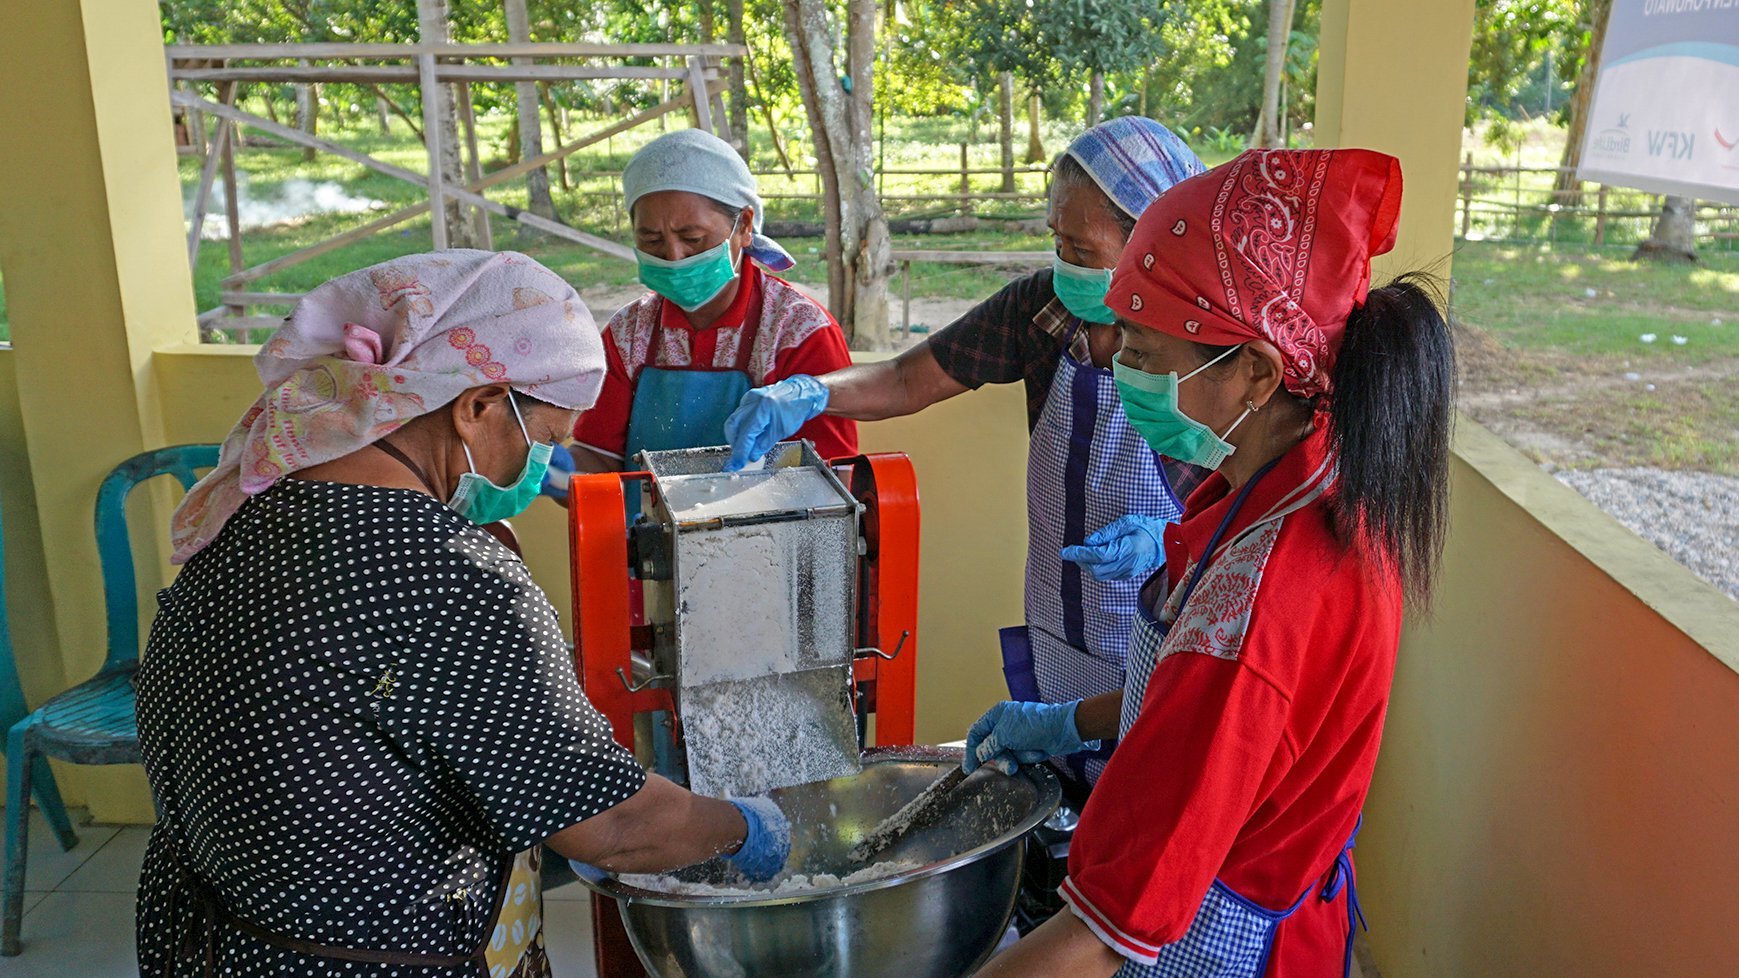 Women_s group processes raw coconut into coconut oil_Burung Indonesia_Muhammad Meisa.jpg